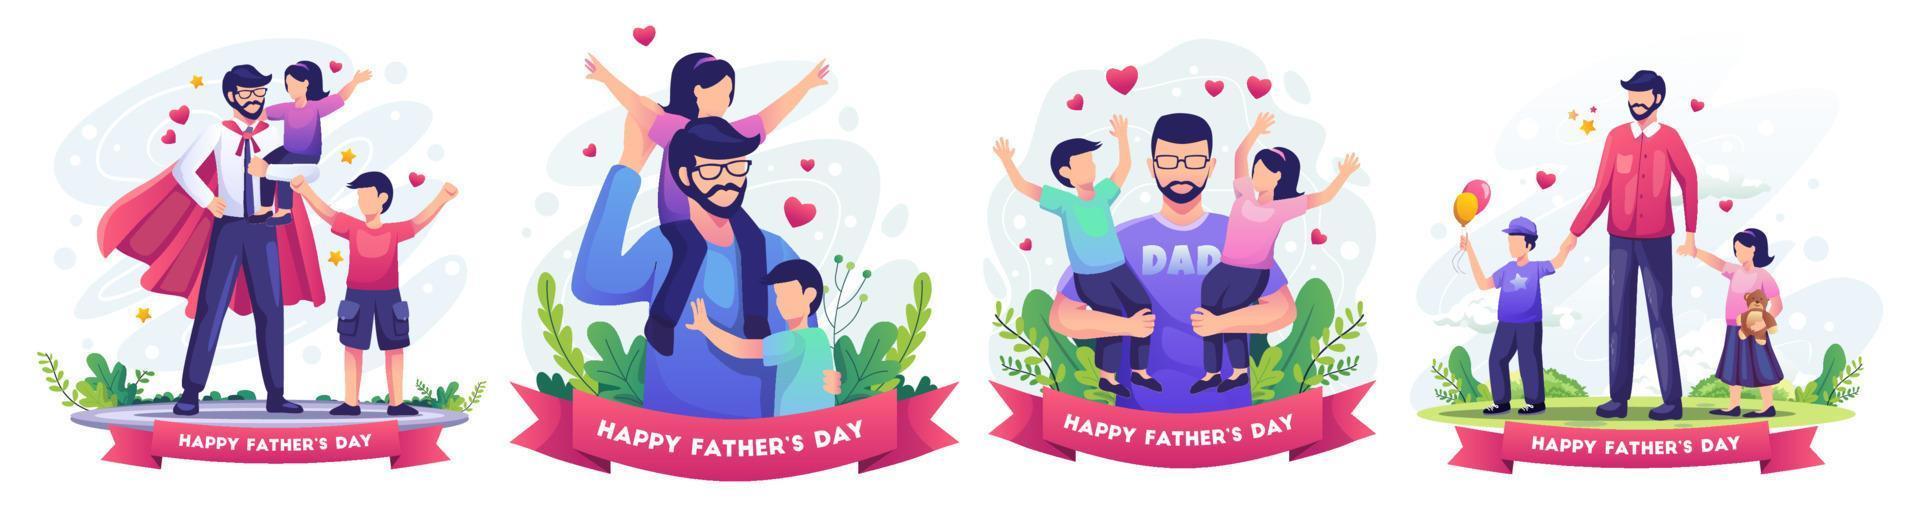 Set of  Happy Father's day with Father playing with his childrens. Father as super hero. Flat style vector illustration